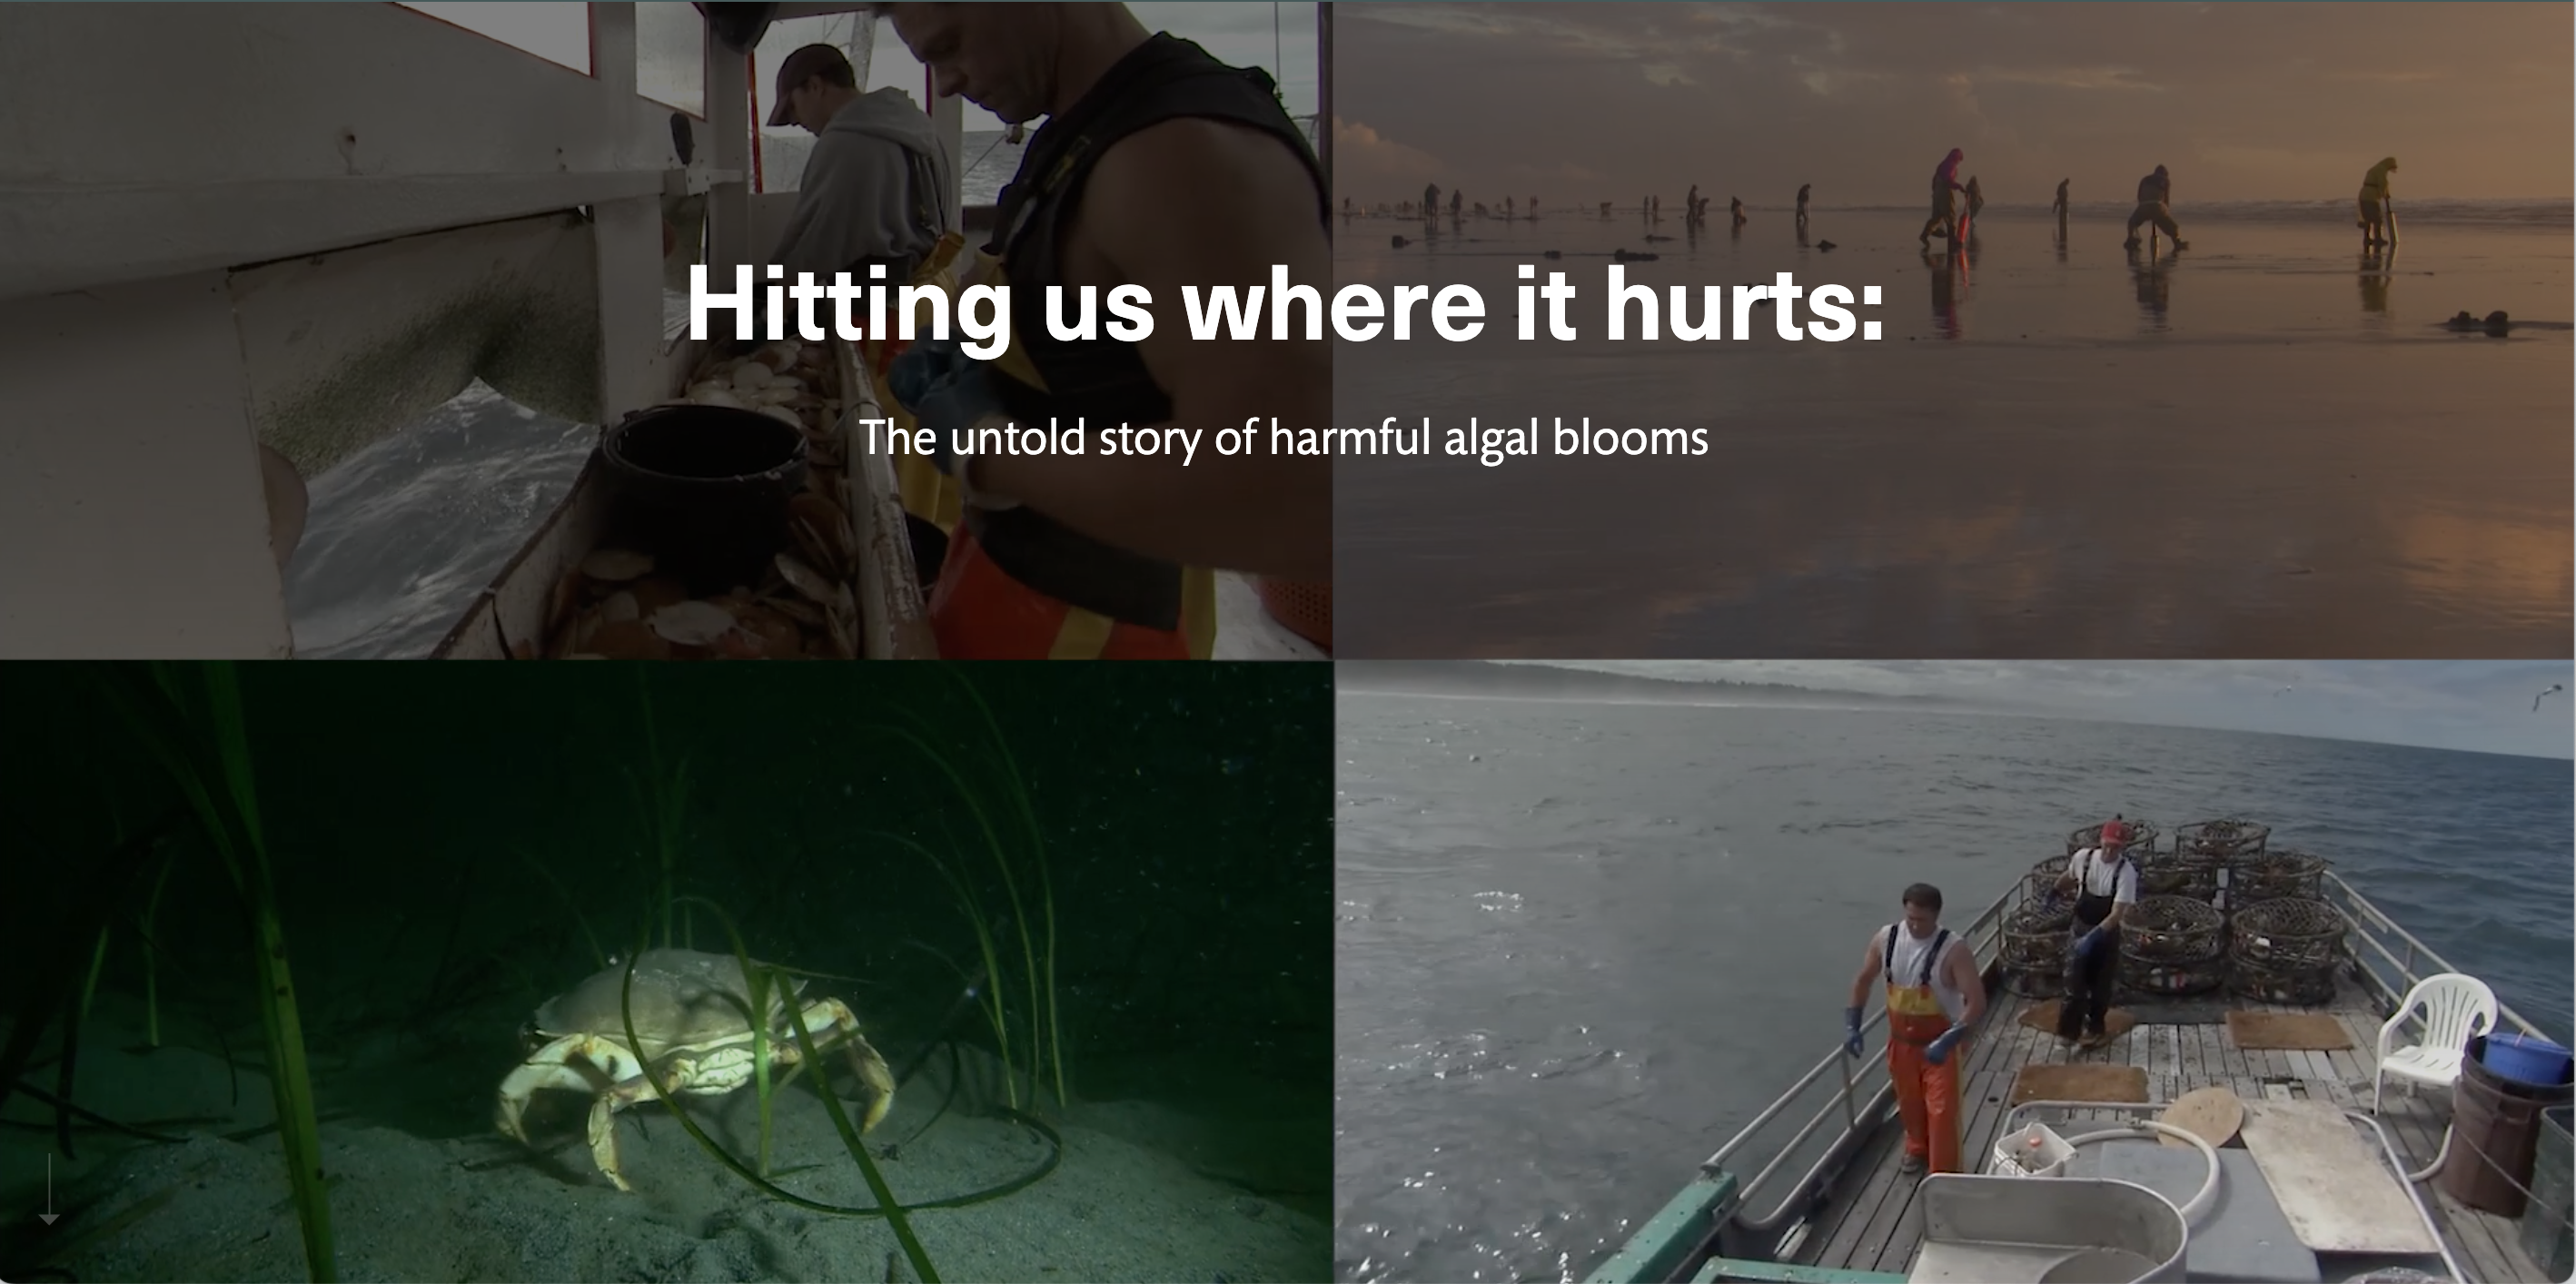 NOAA has developed an interactive story map "<a href="https://arcg.is/1LembS">Hitting us where it hurts: The untold story of harmful algal blooms</a>" that documents the economic and social impacts of harmful algal blooms. It is based on a compilation of data from almost 40 events, but even so, our understanding and quantification of socioeconomic impacts of HABs remains incomplete.